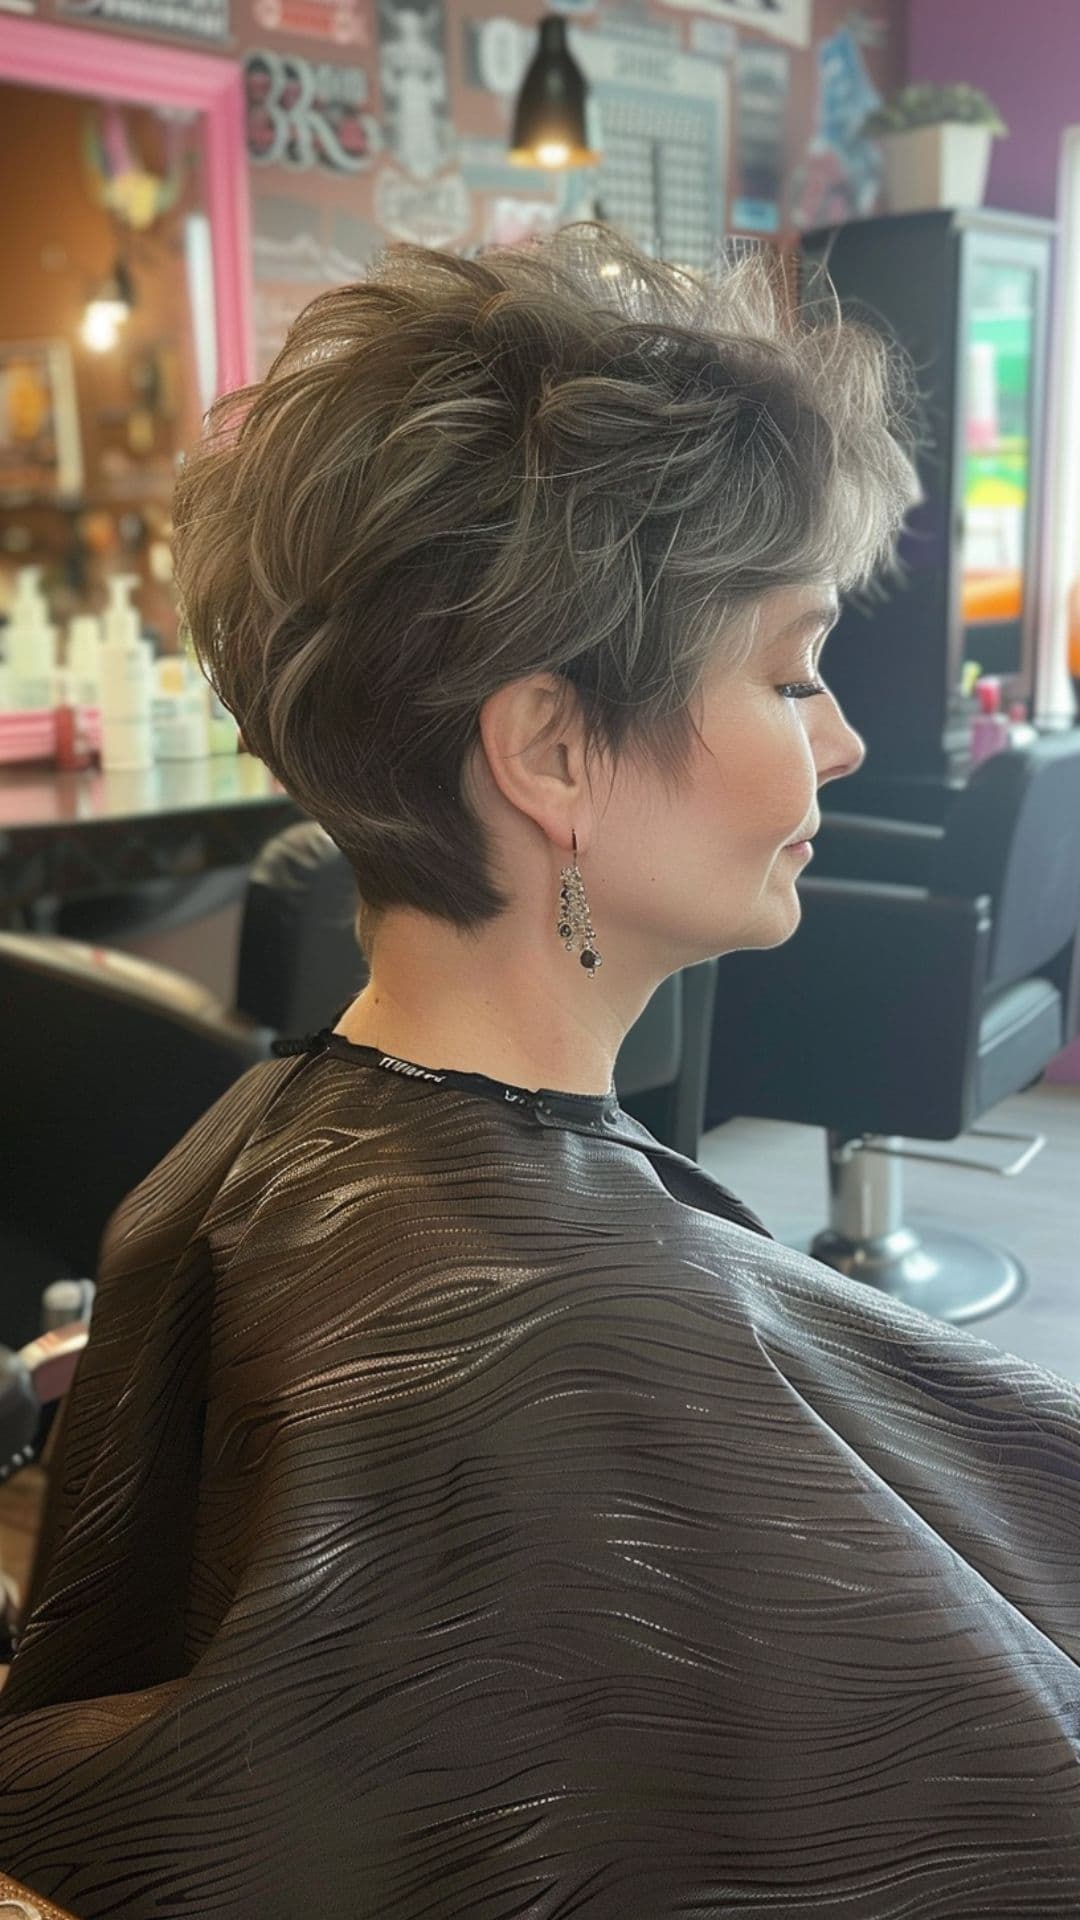 An older woman modelling a feathered pixie cut.